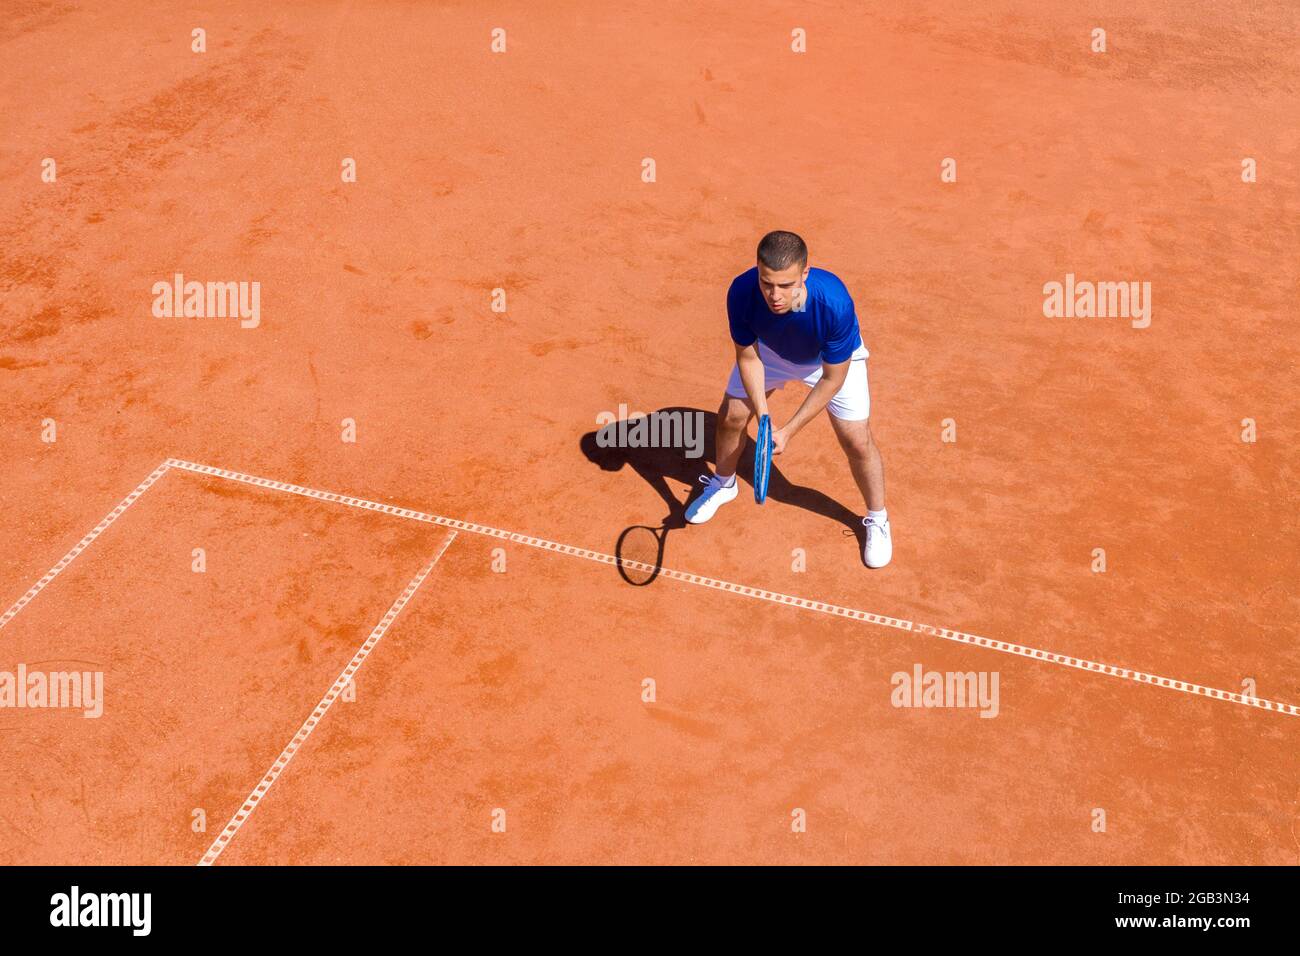 Aerial view of a professional sportsman tennis player waiting for the serve of the opponent Stock Photo